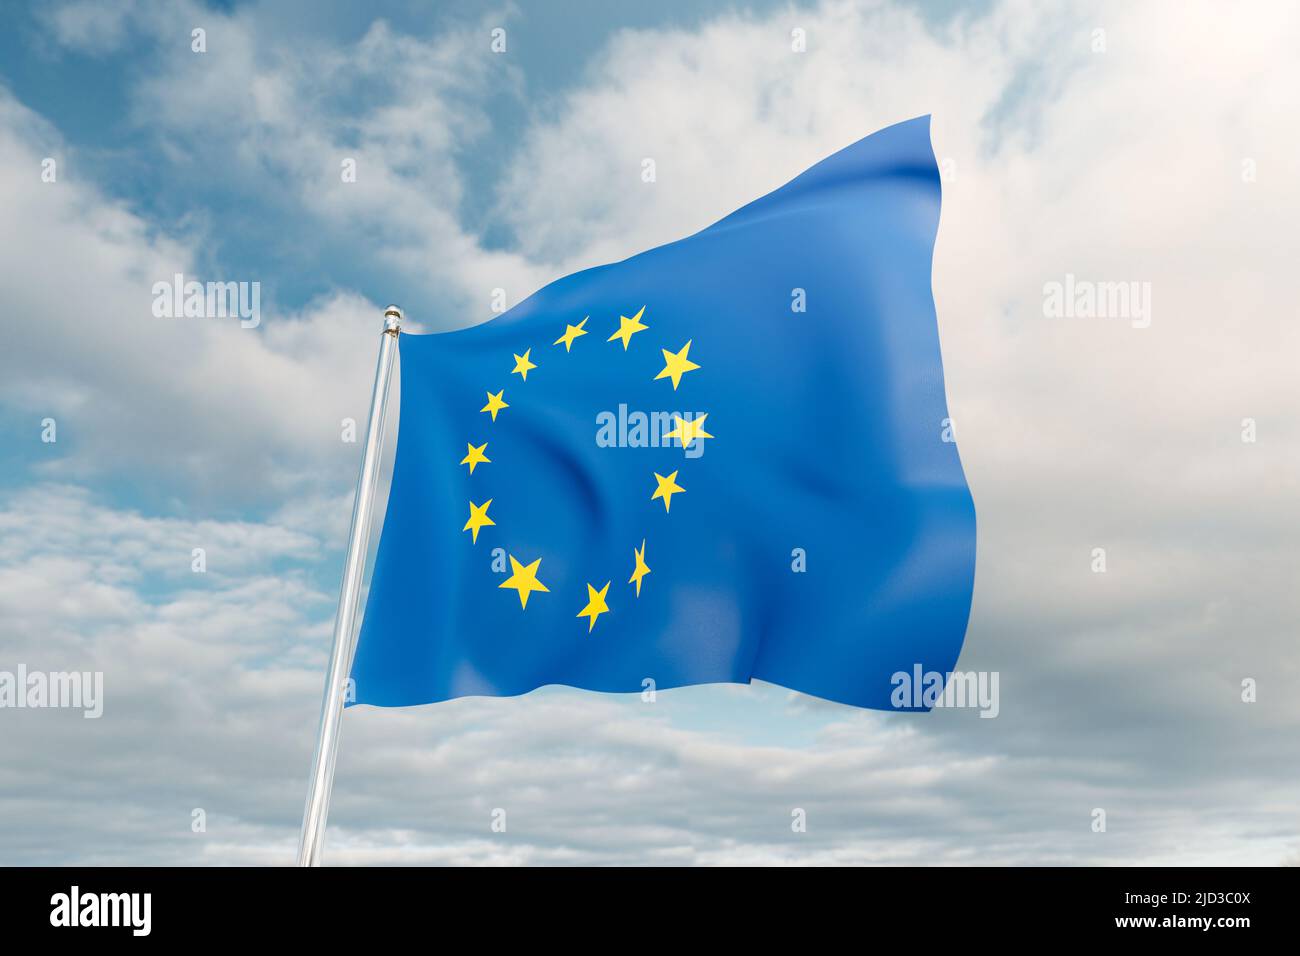 European Union flag against blue sky. 3d digitally generated image of EU flag on the flagpole in the wind Stock Photo